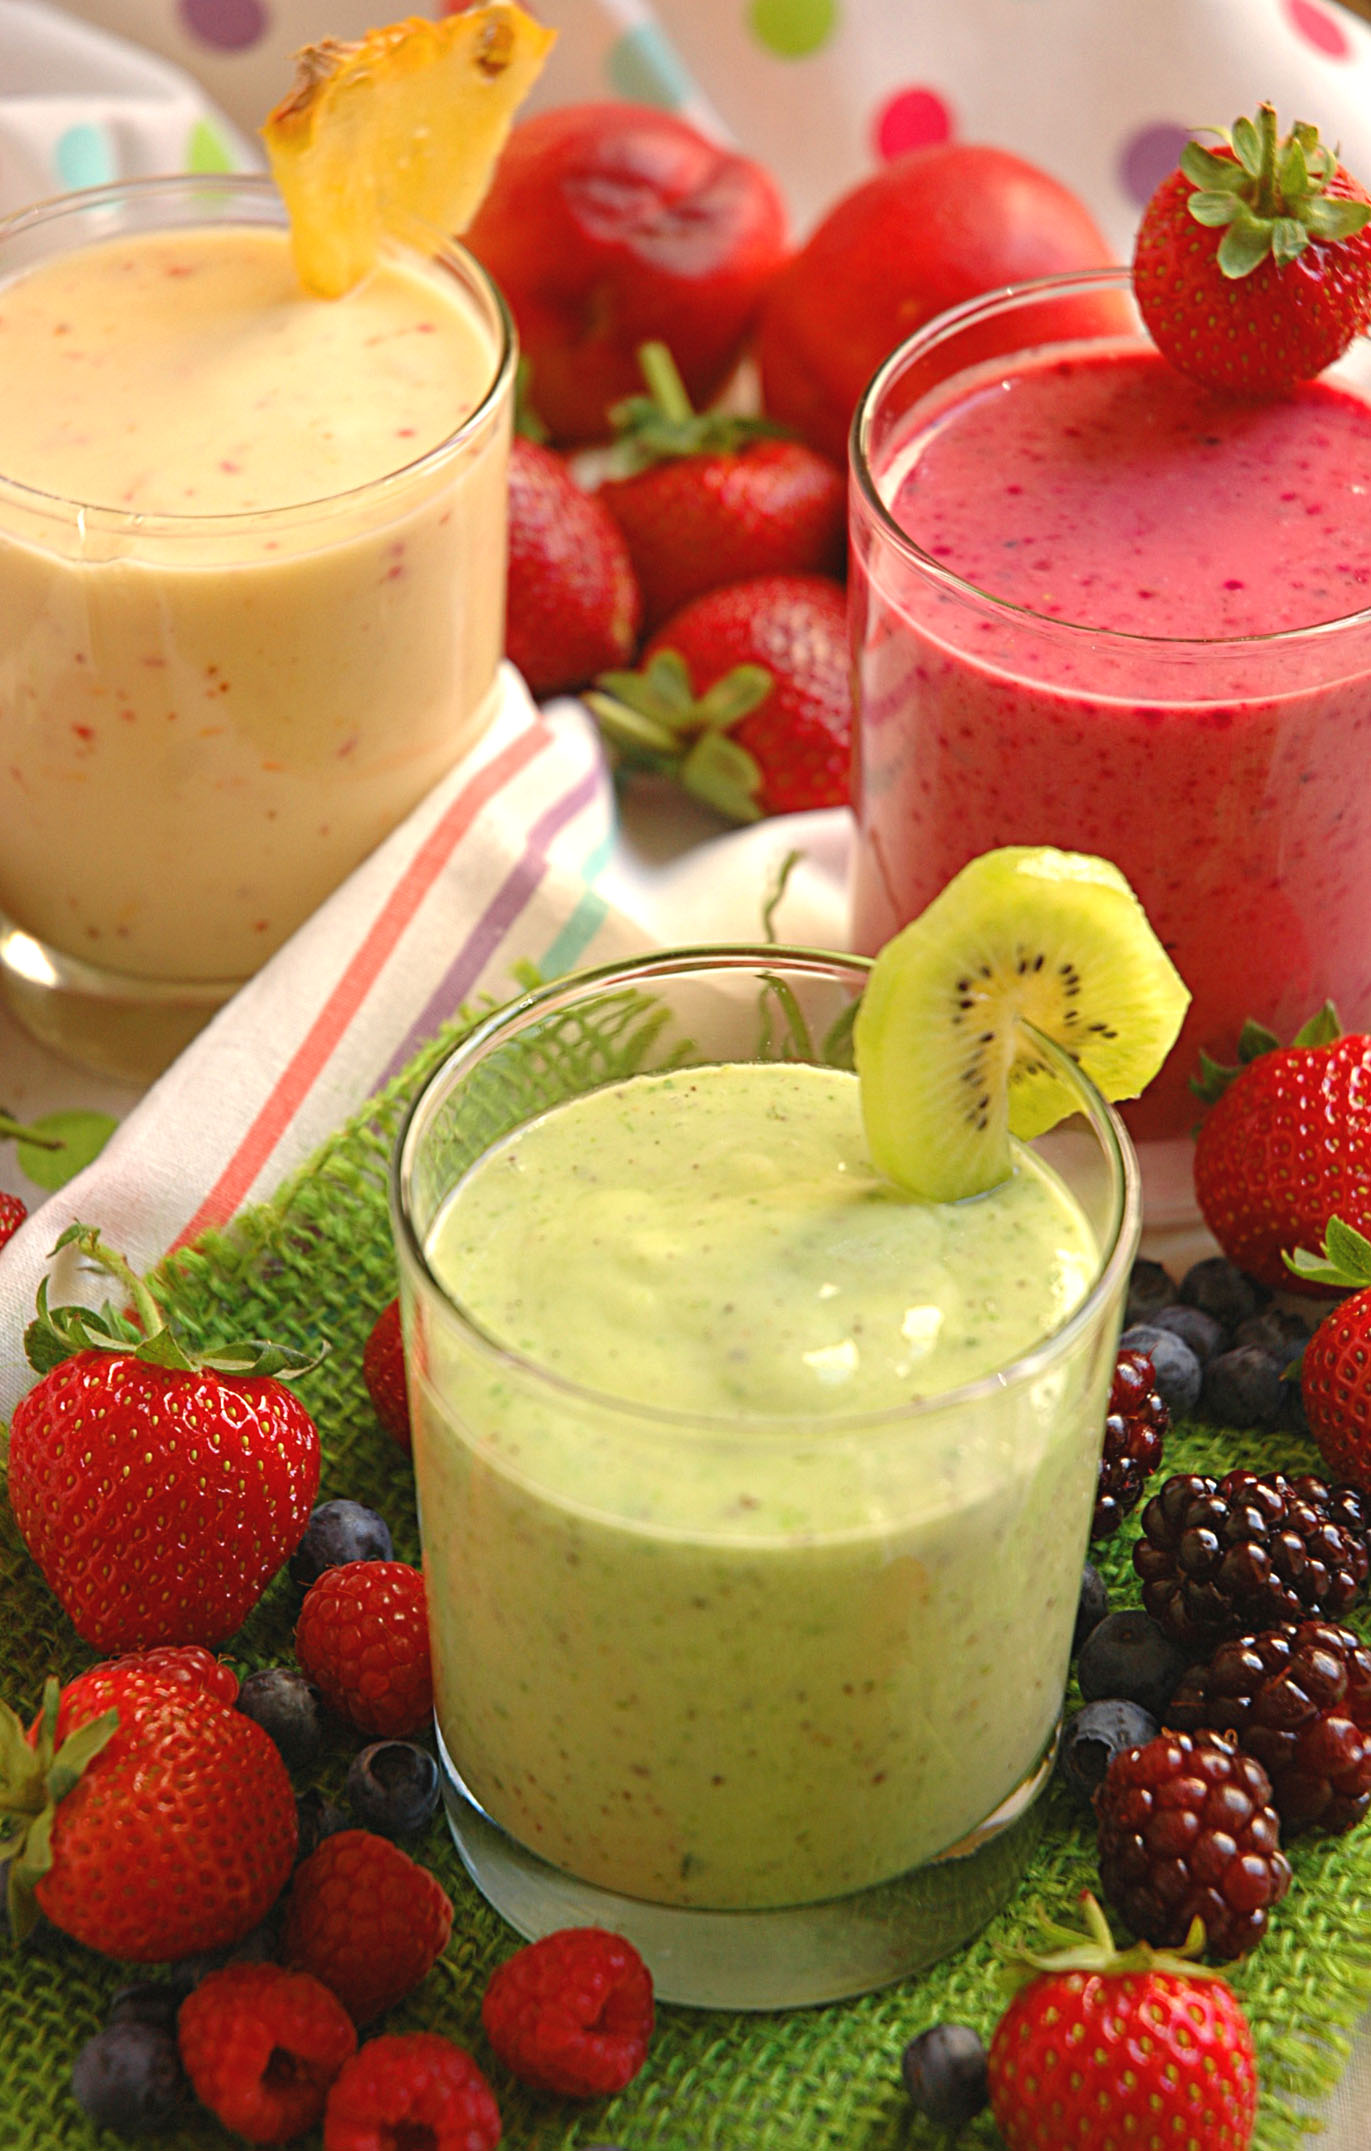 Smoothies - Why not sneak in a vegetable or two?